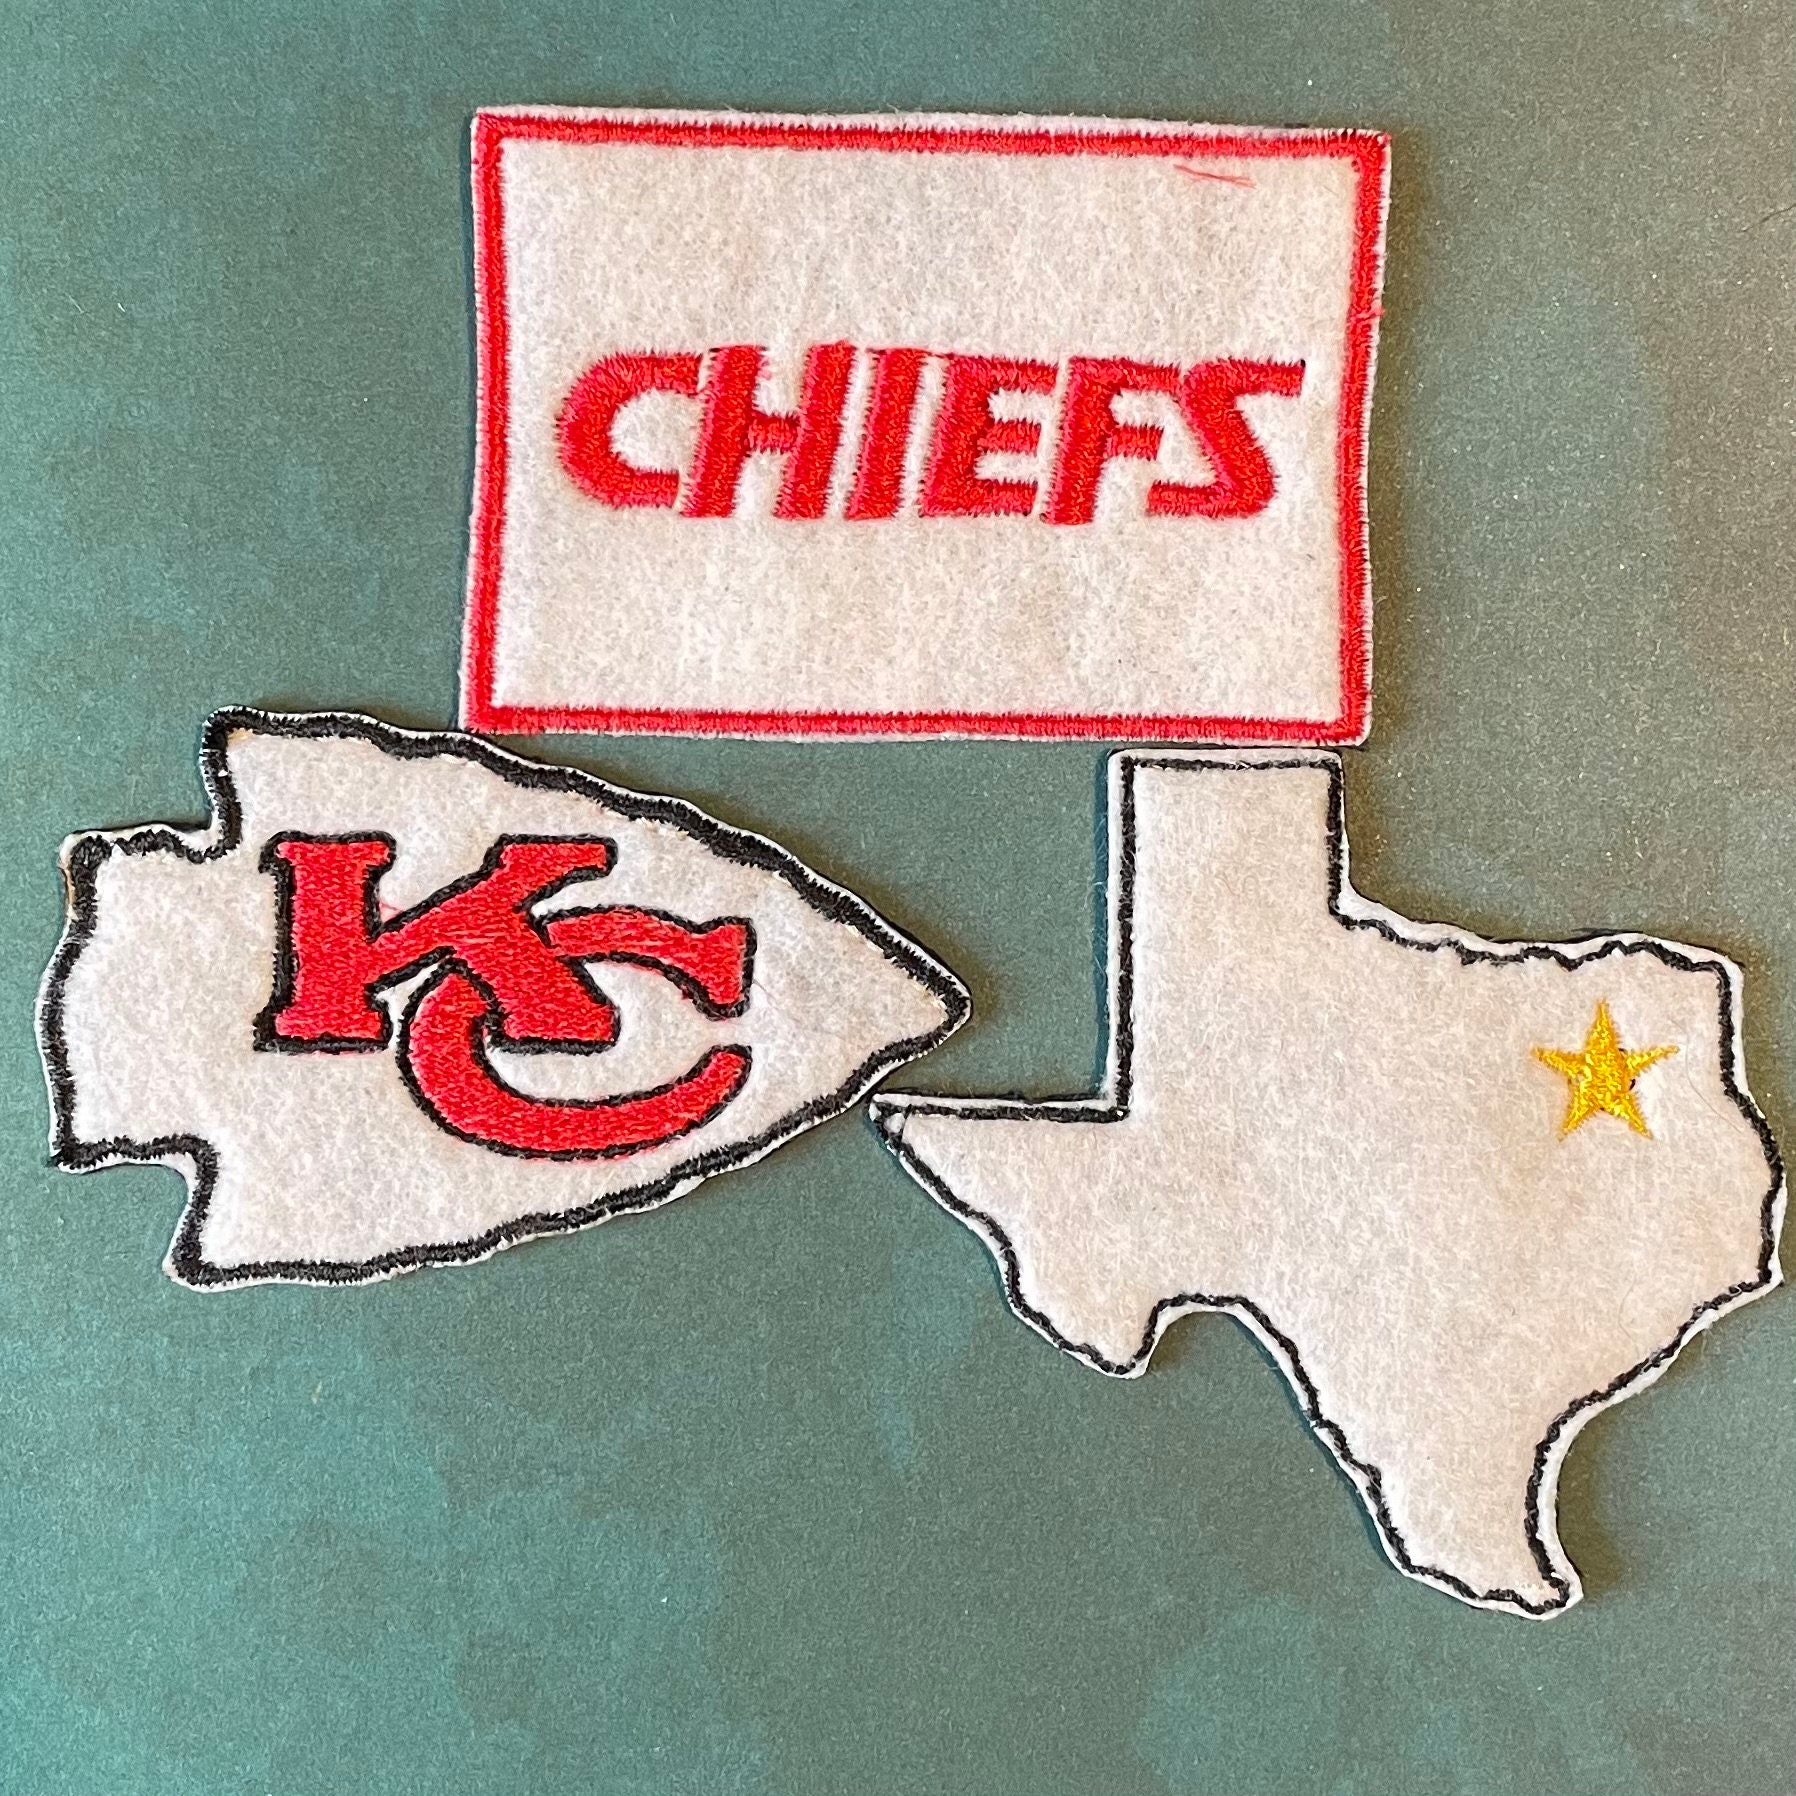 HUGE KANSAS CITY CHIEFS SHIMMERING IRON-ON PATCH - 6 x 9.5